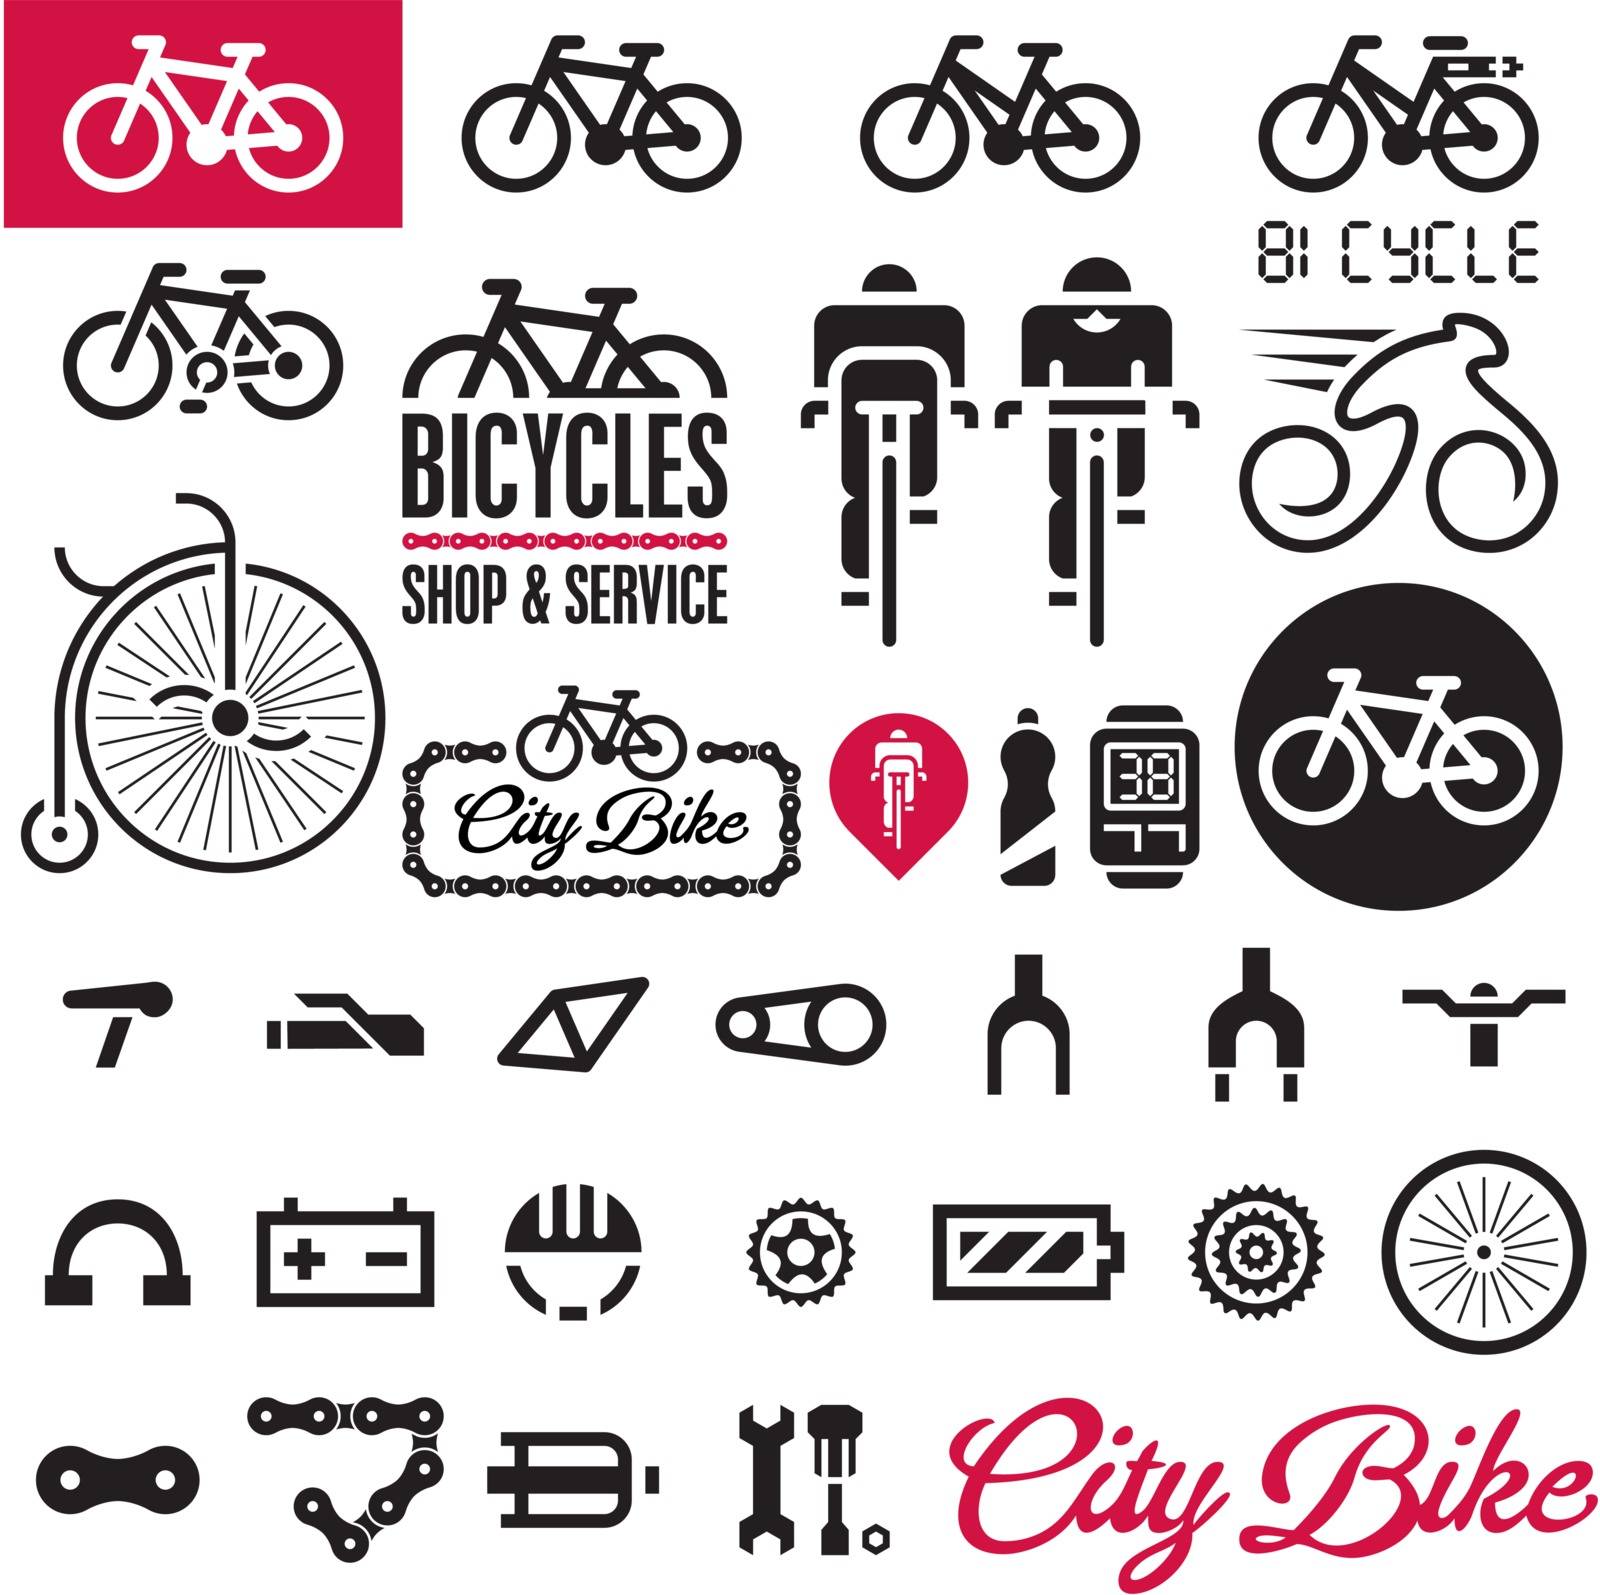 Bicycle elements by kartyl